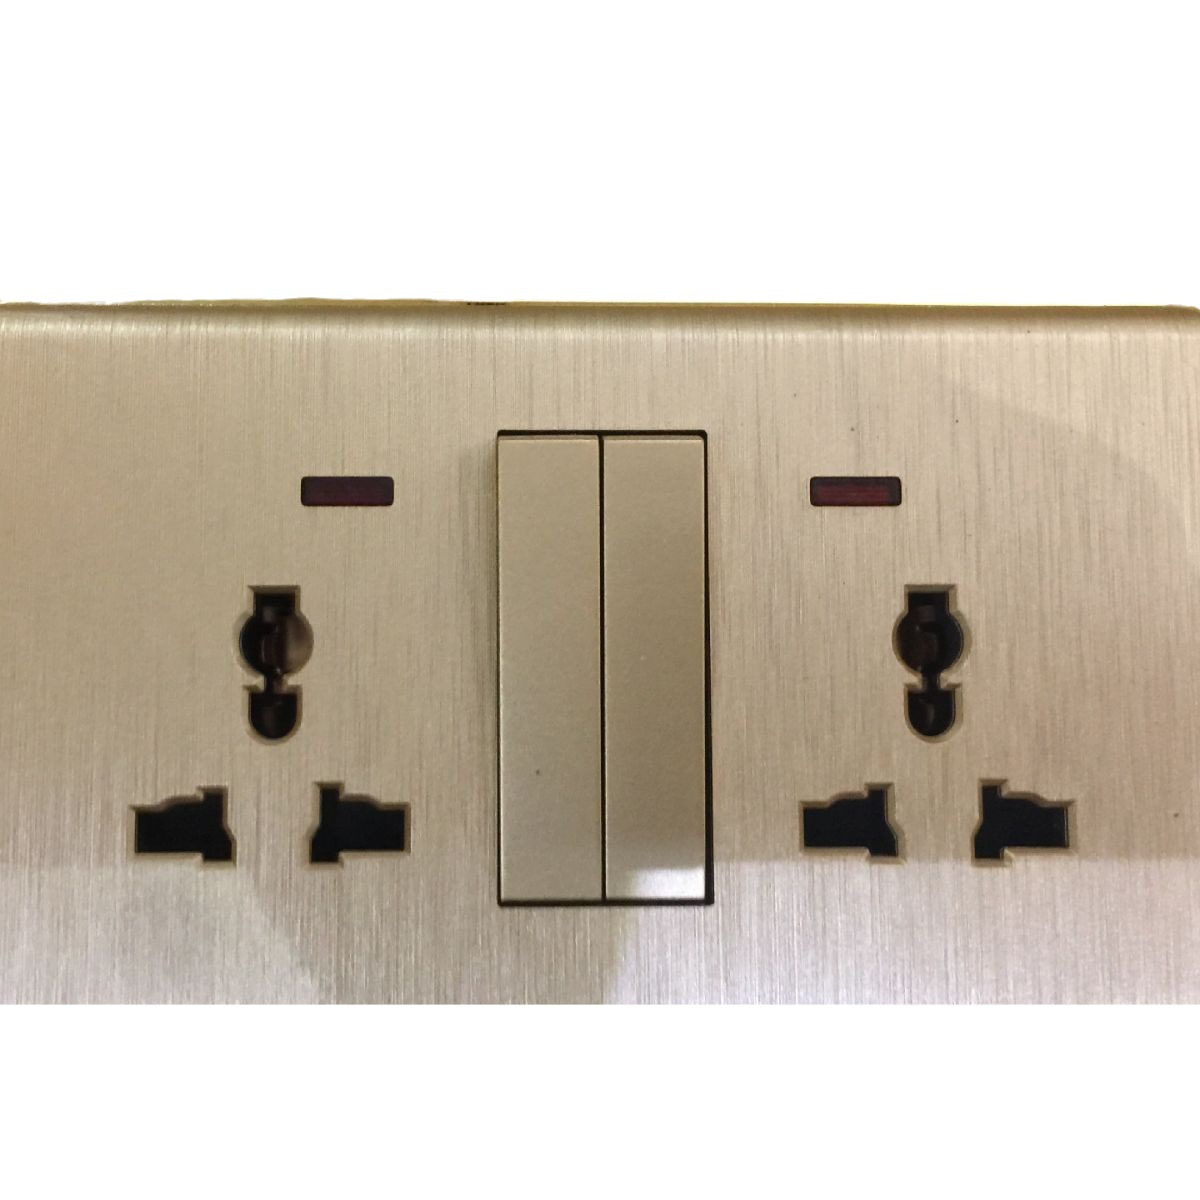 New Arrival Reasonable Price Electric Switches And Sockets On Off Switch Panel